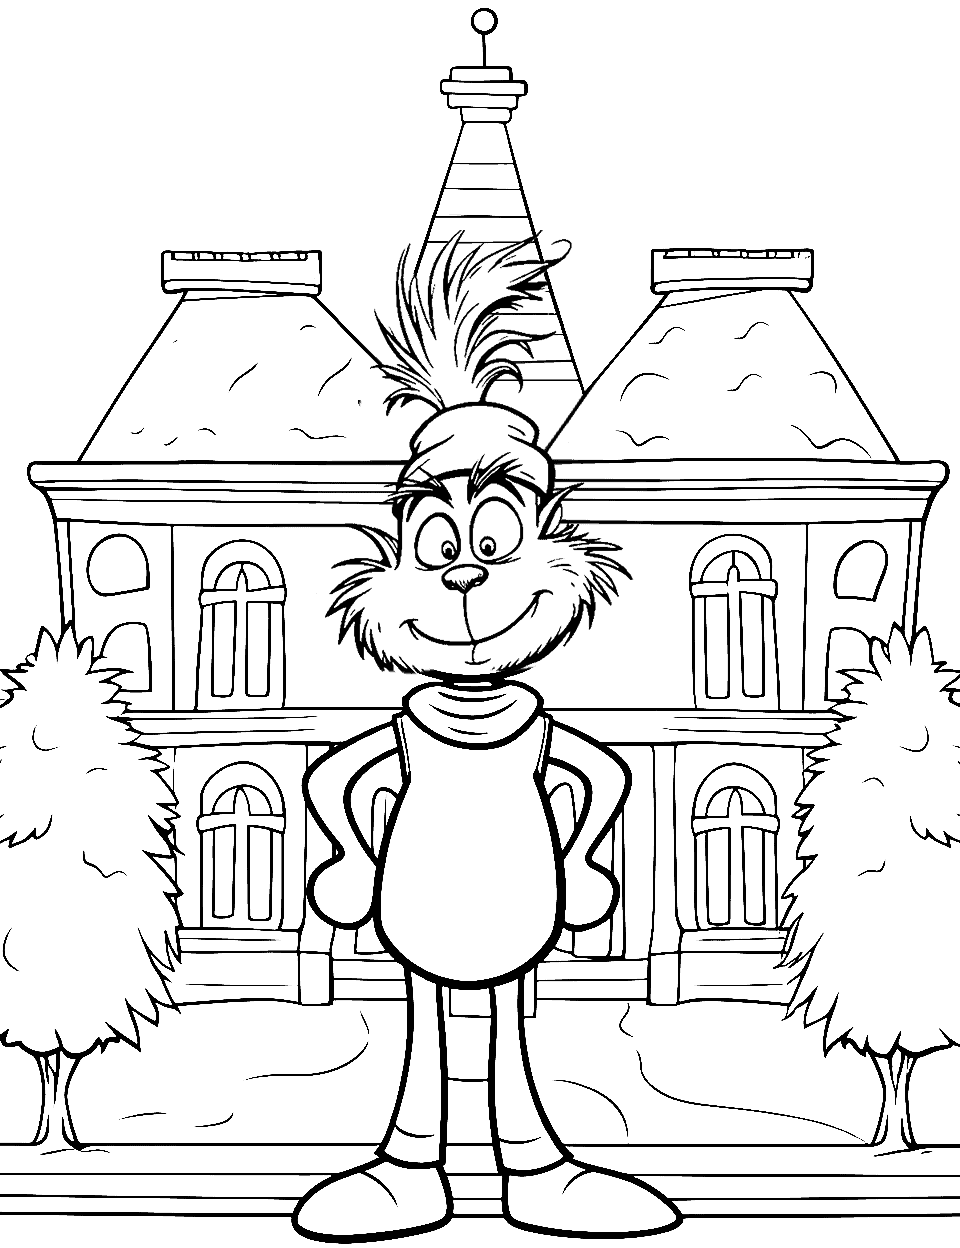 School Day Grinch Coloring Page - Young Grinch is standing in front of a school building, ready for his first day at school.